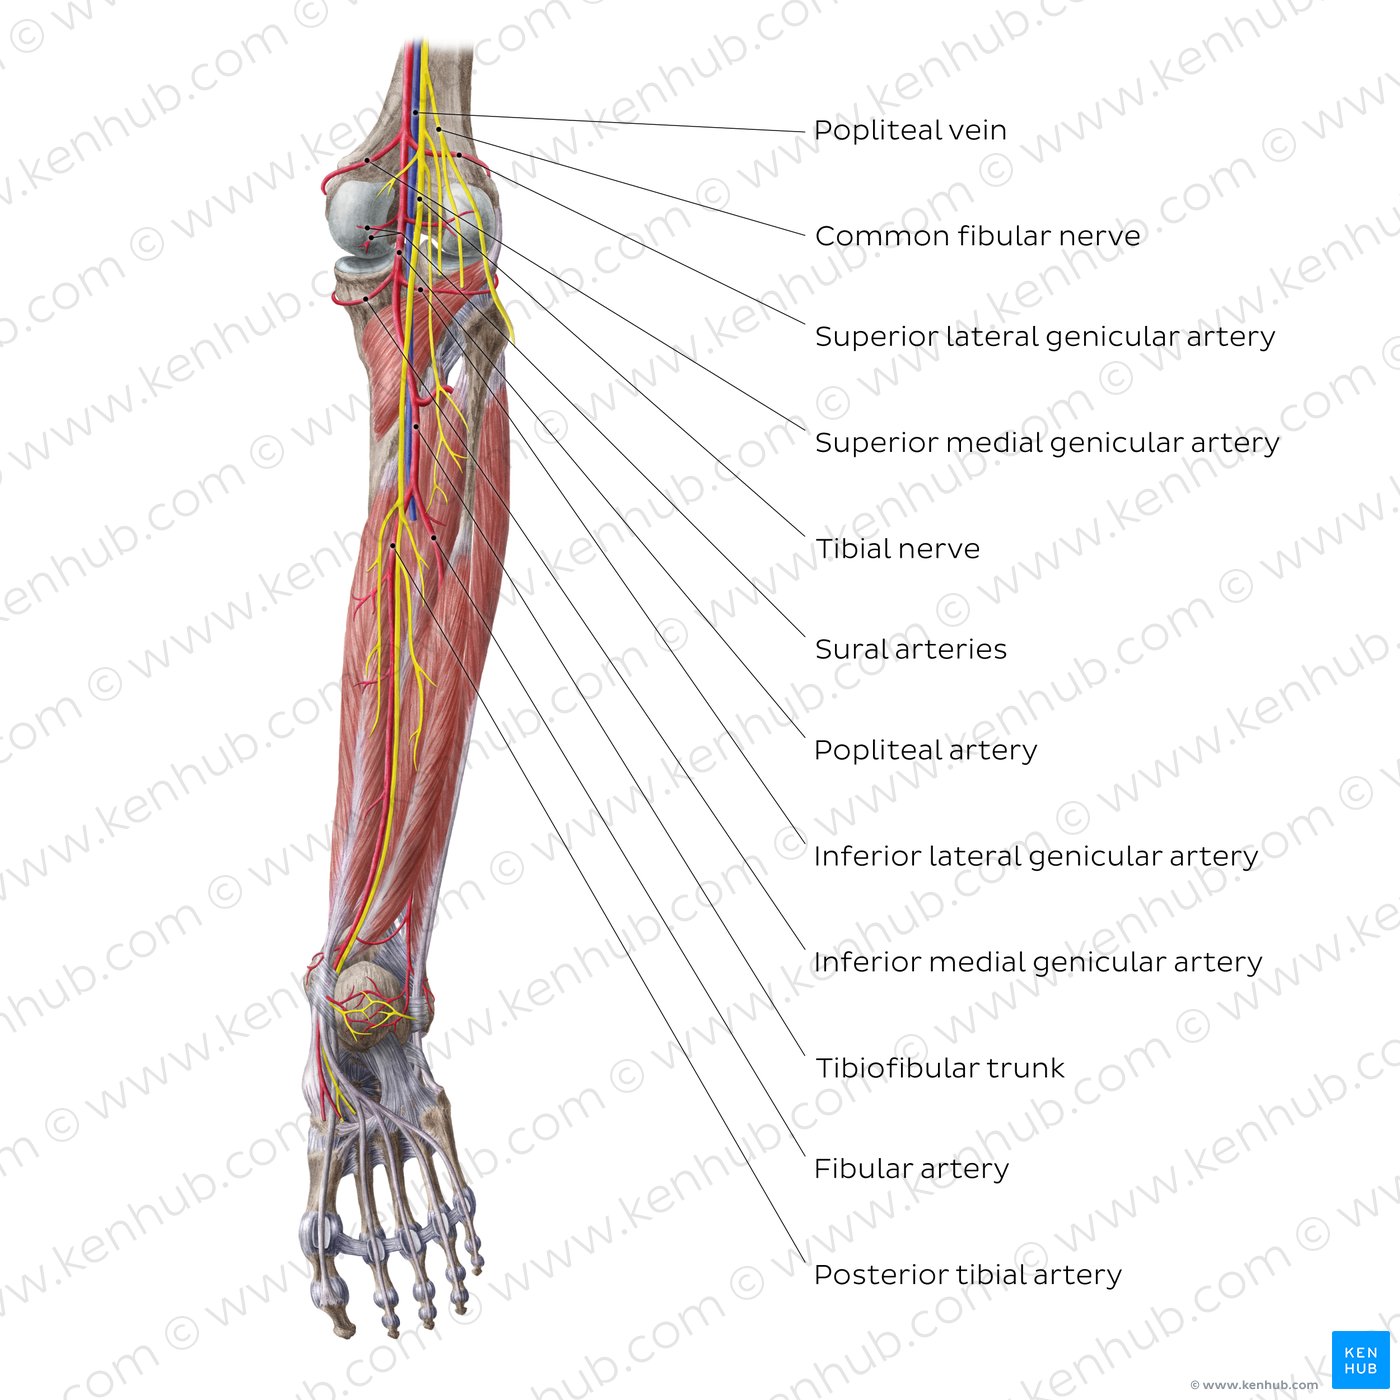 Overview of the nerves and vessels of the leg (posterior view)